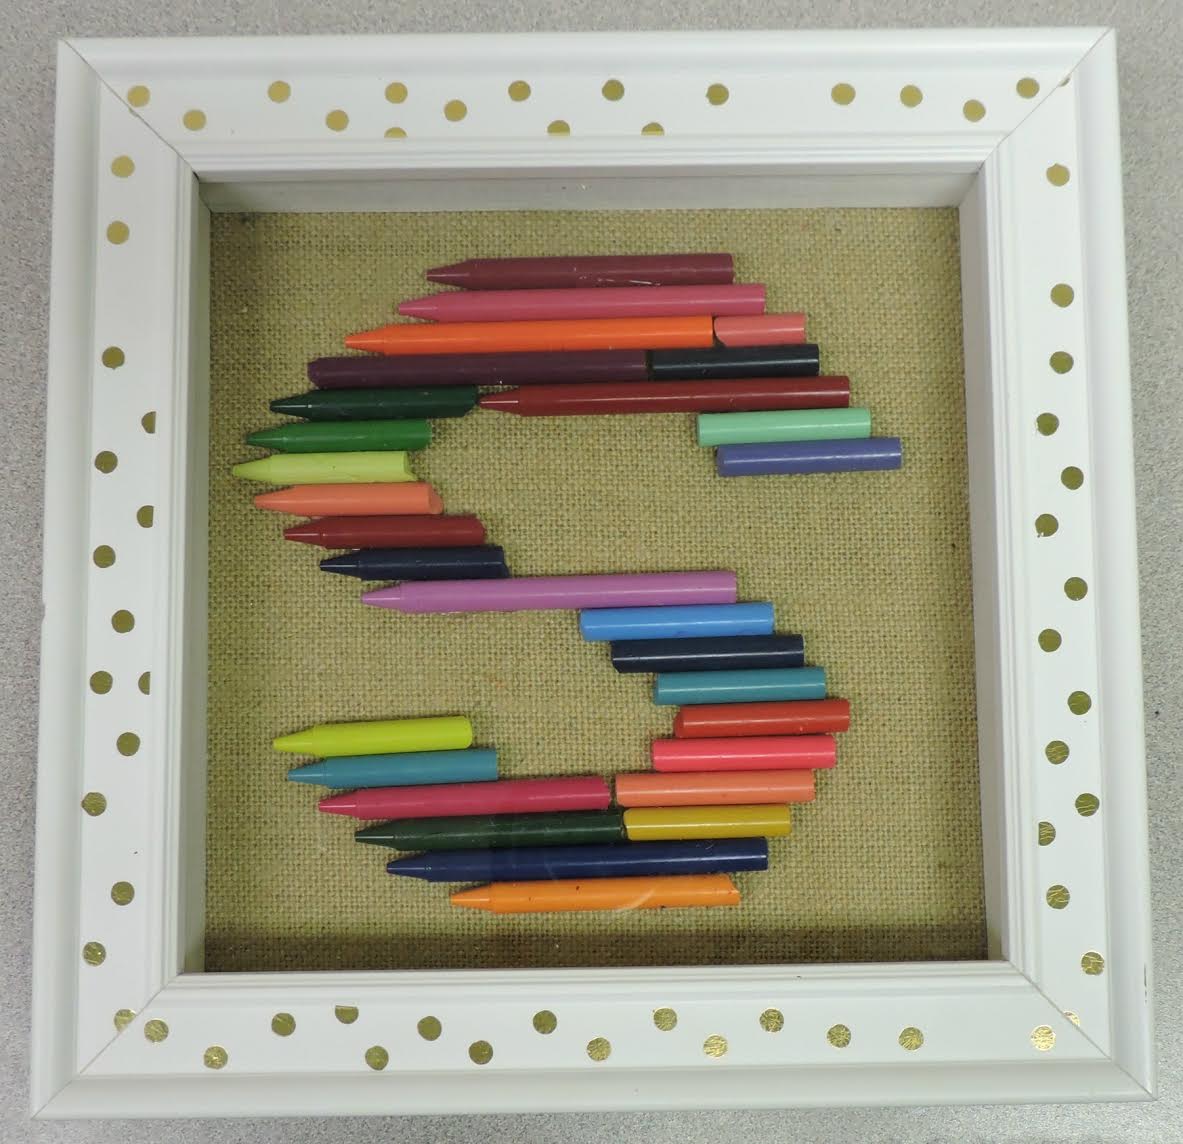 Crayon figure of the letter 